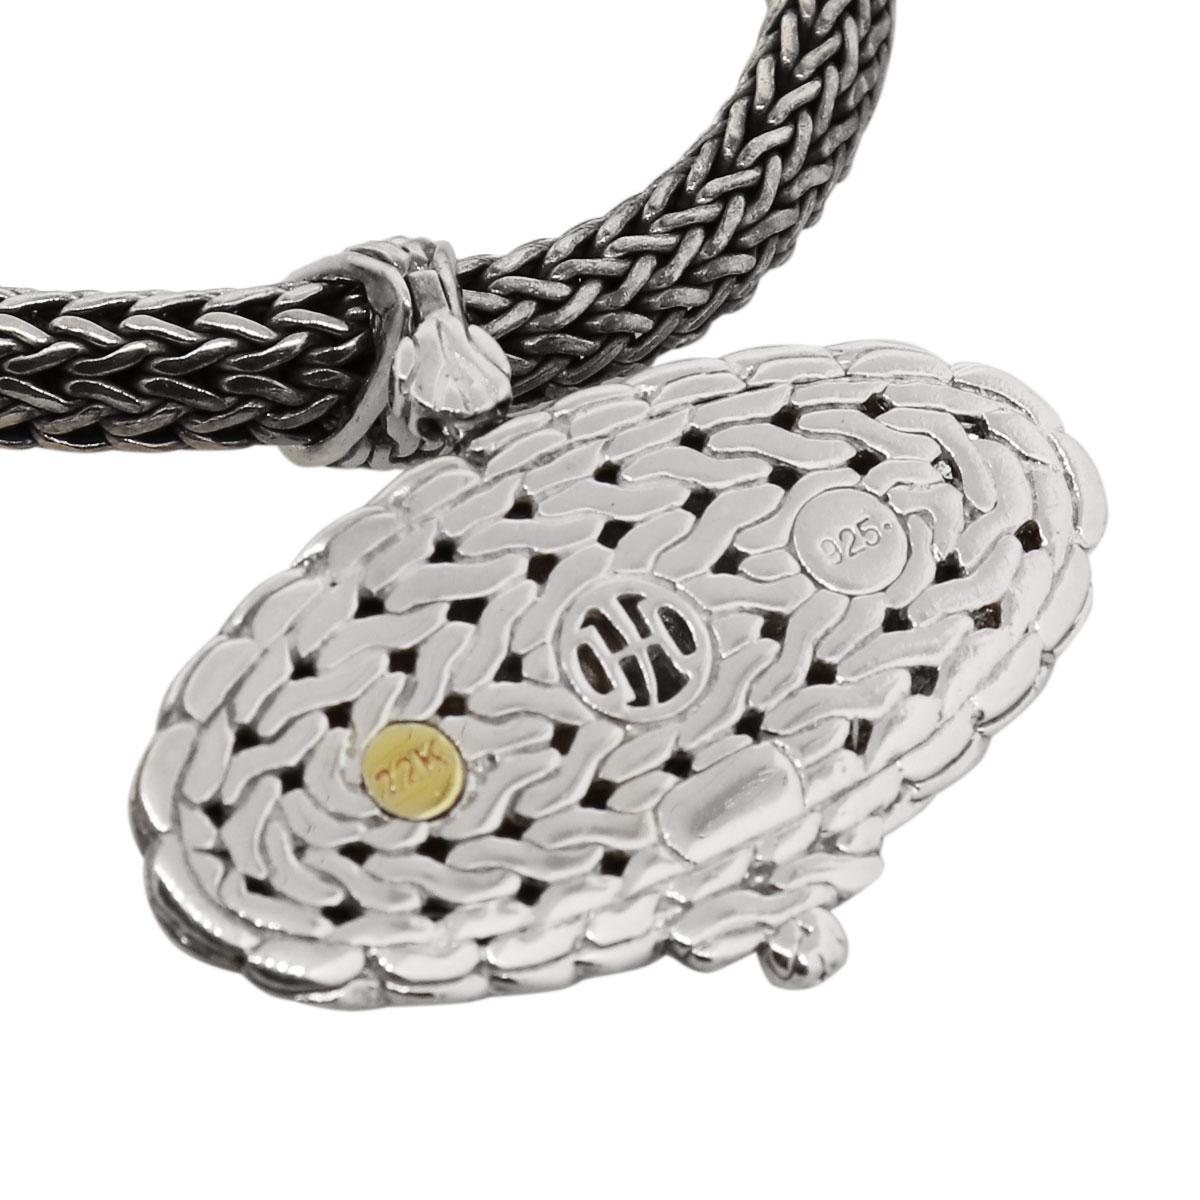 Designer: John Hardy
Material: 22k yellow gold and sterling silver
Necklace Measurements: Sterling silver necklace is 16″ in length
Pendant Measurements: 1.62″ x 0.28″ x 1.62″
Clasp: Tongue in box clasp
Total Weight: 69.5g (44.7dwt)
Additional